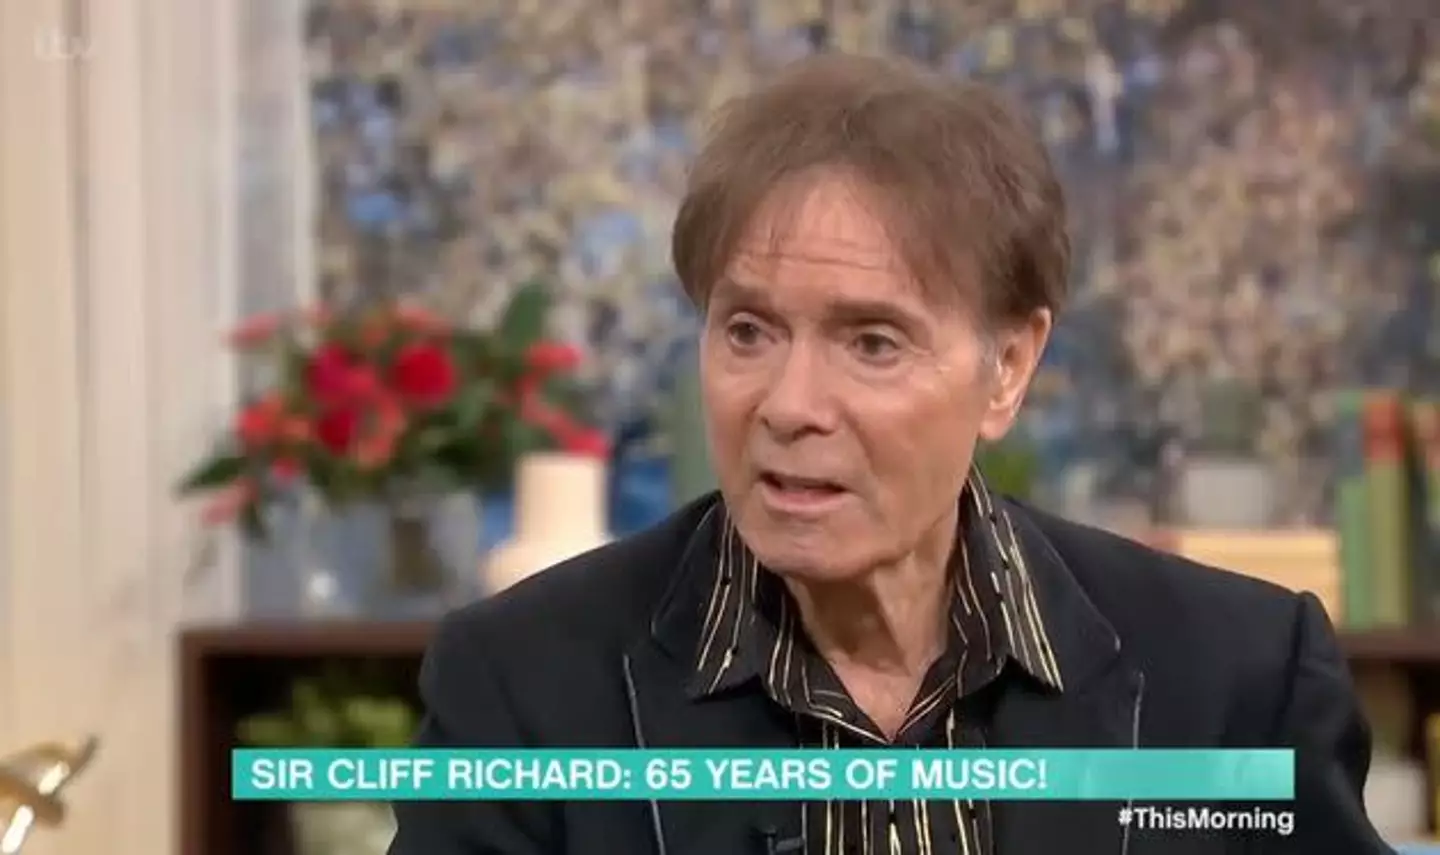 Sir Cliff Richard has come under fire for comments he made on This Morning.